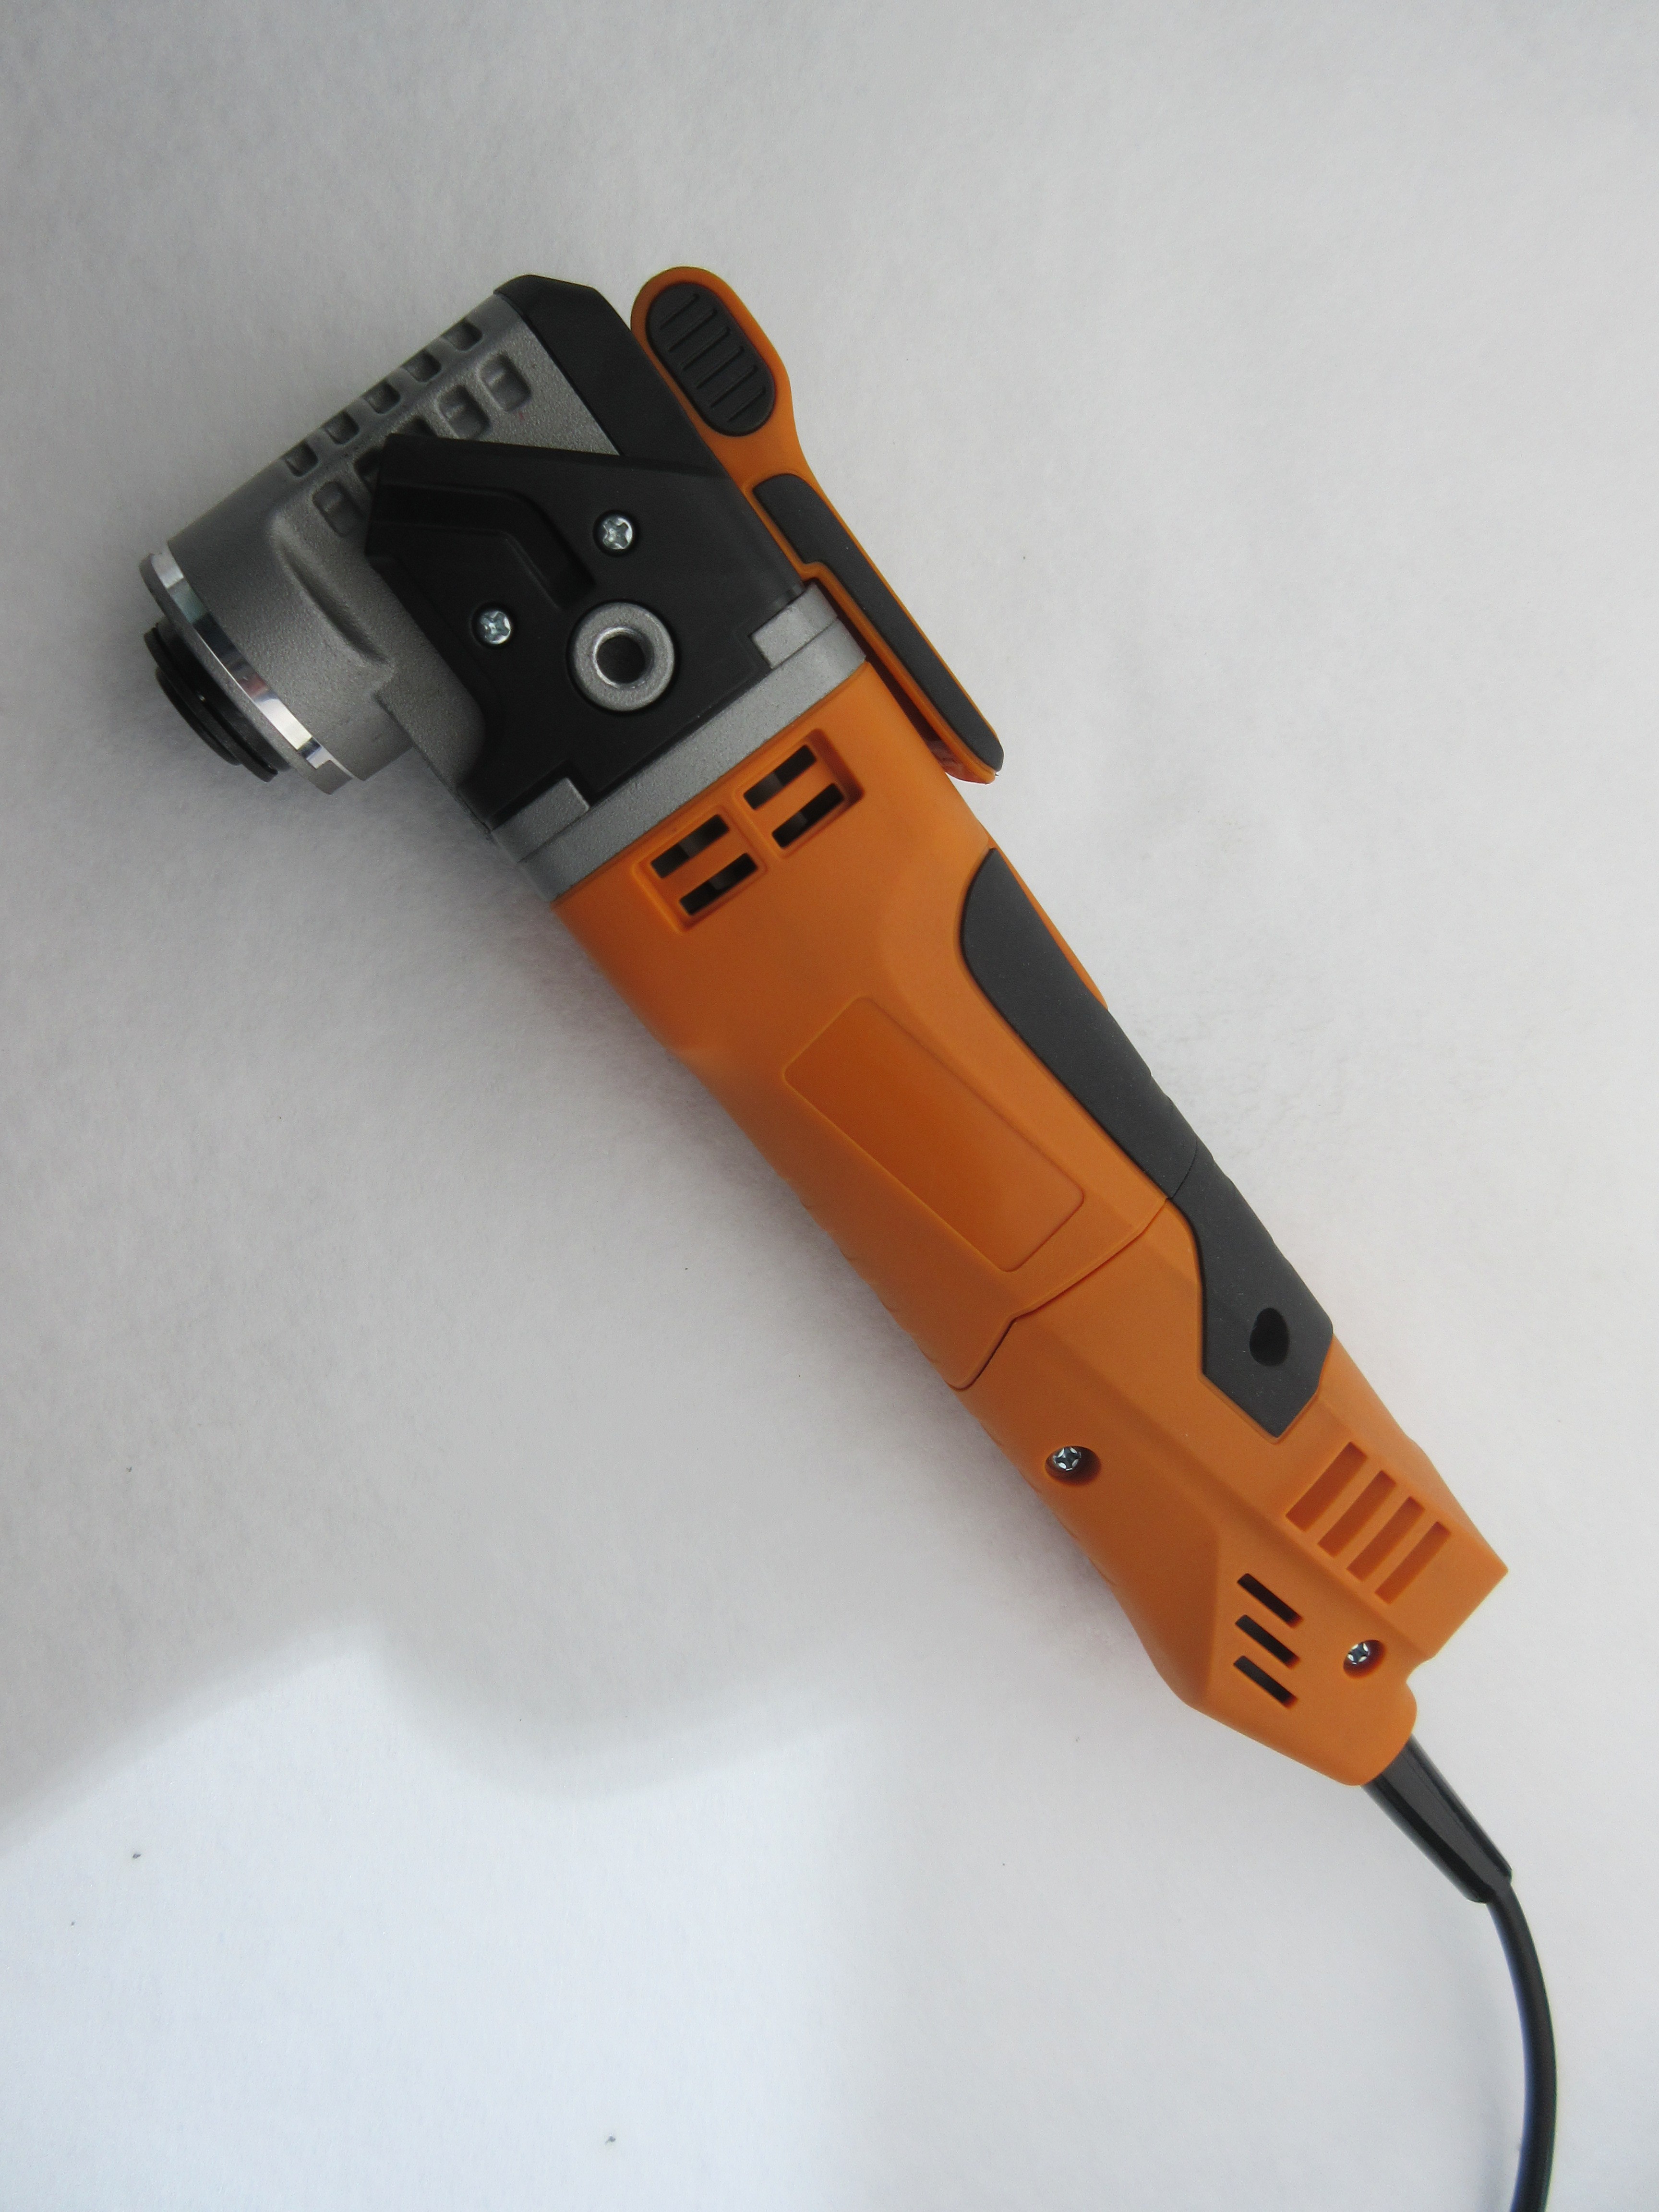 Low cost power tools oscillating multi tool with LED light